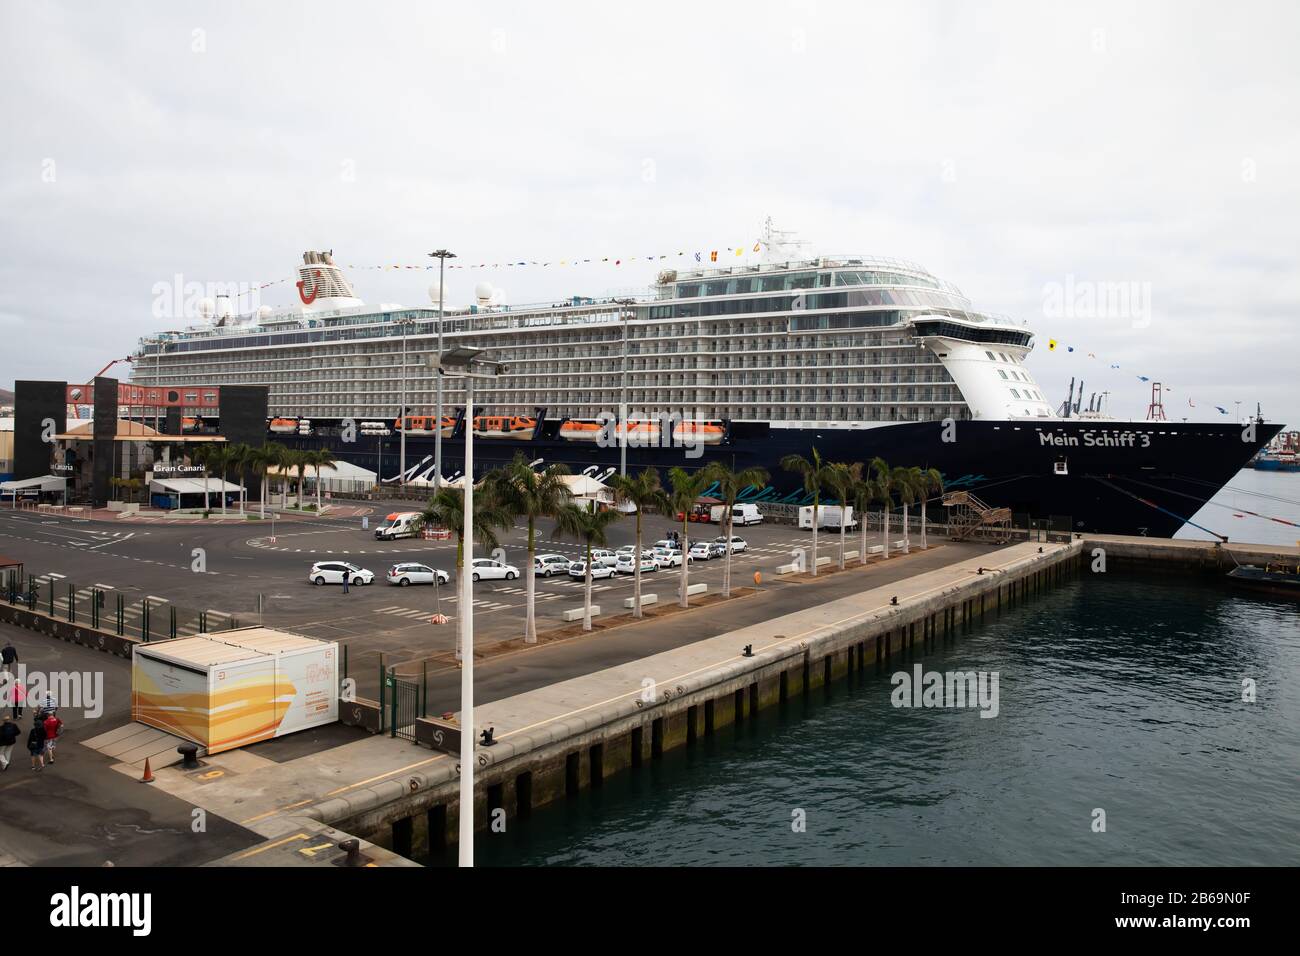 Mein Schiff 3 moored in Las Palmas, Gran Canaria, one of Spains Canary Islands off Northwestern Africa Stock Photo